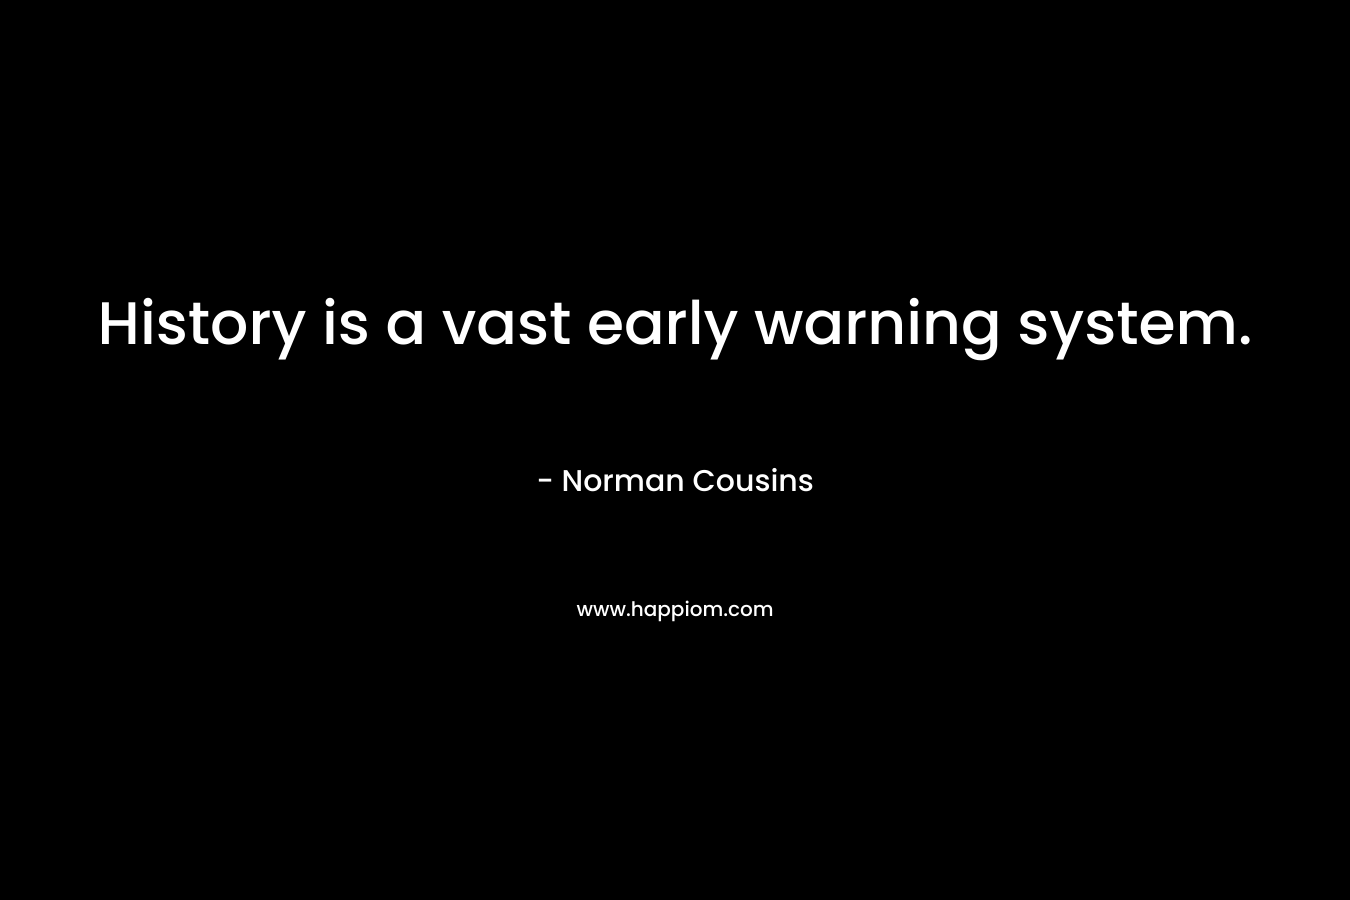 History is a vast early warning system. – Norman Cousins